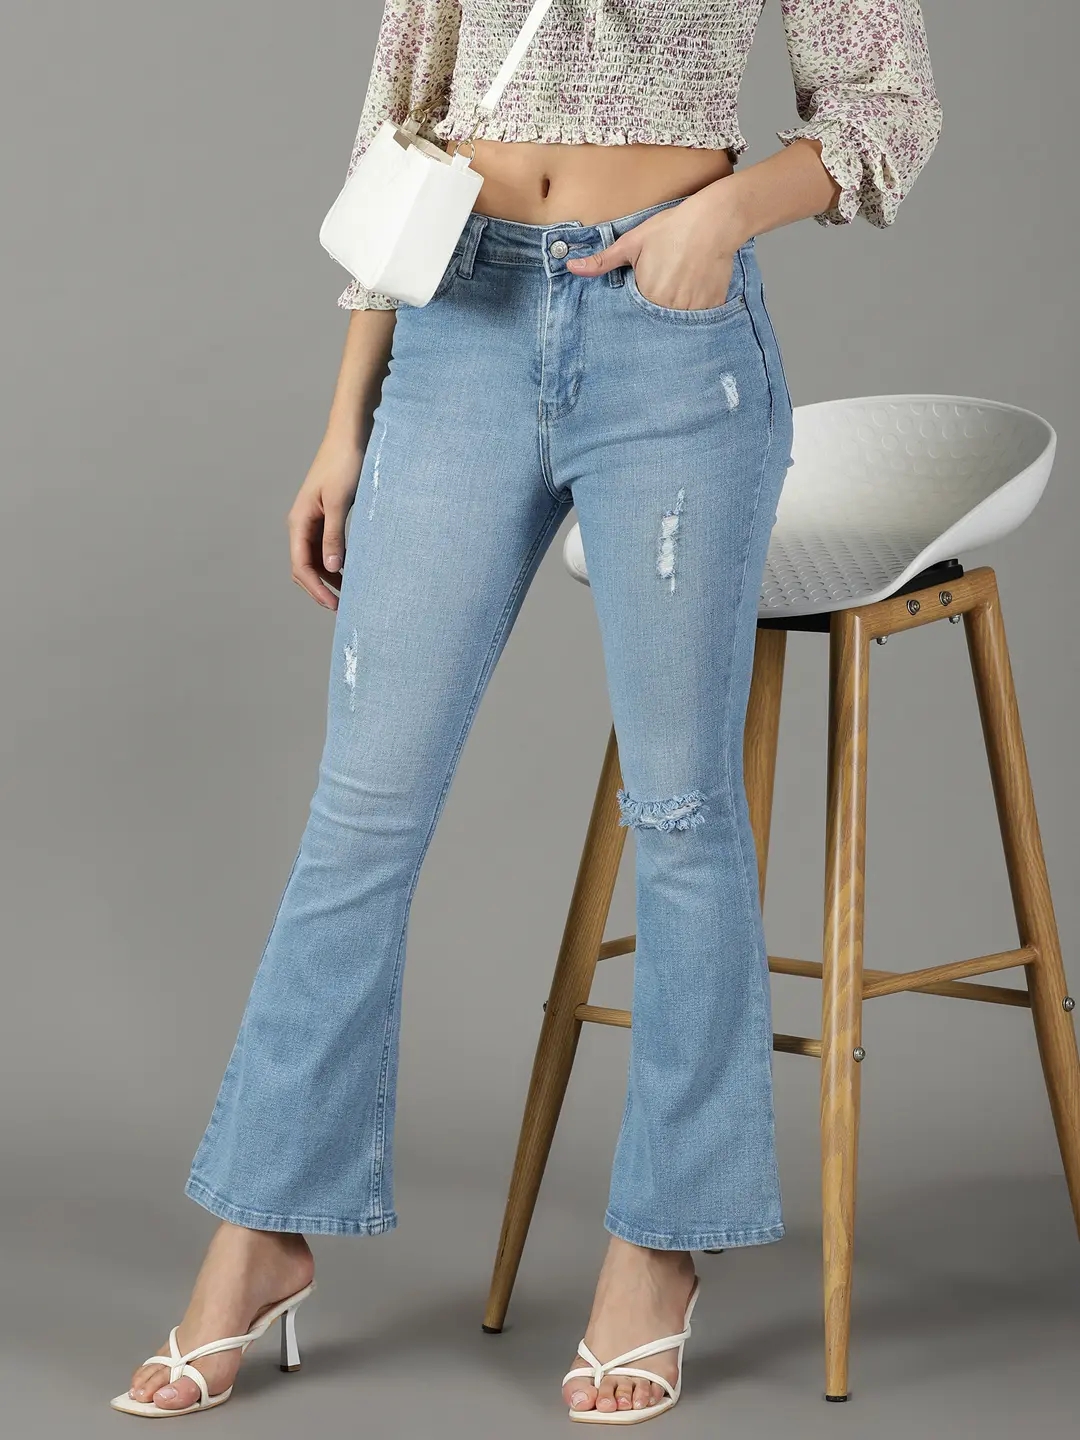 Showoff | SHOWOFF Women's Stretchable Mildly Distressed Blue Bootcut Jeans